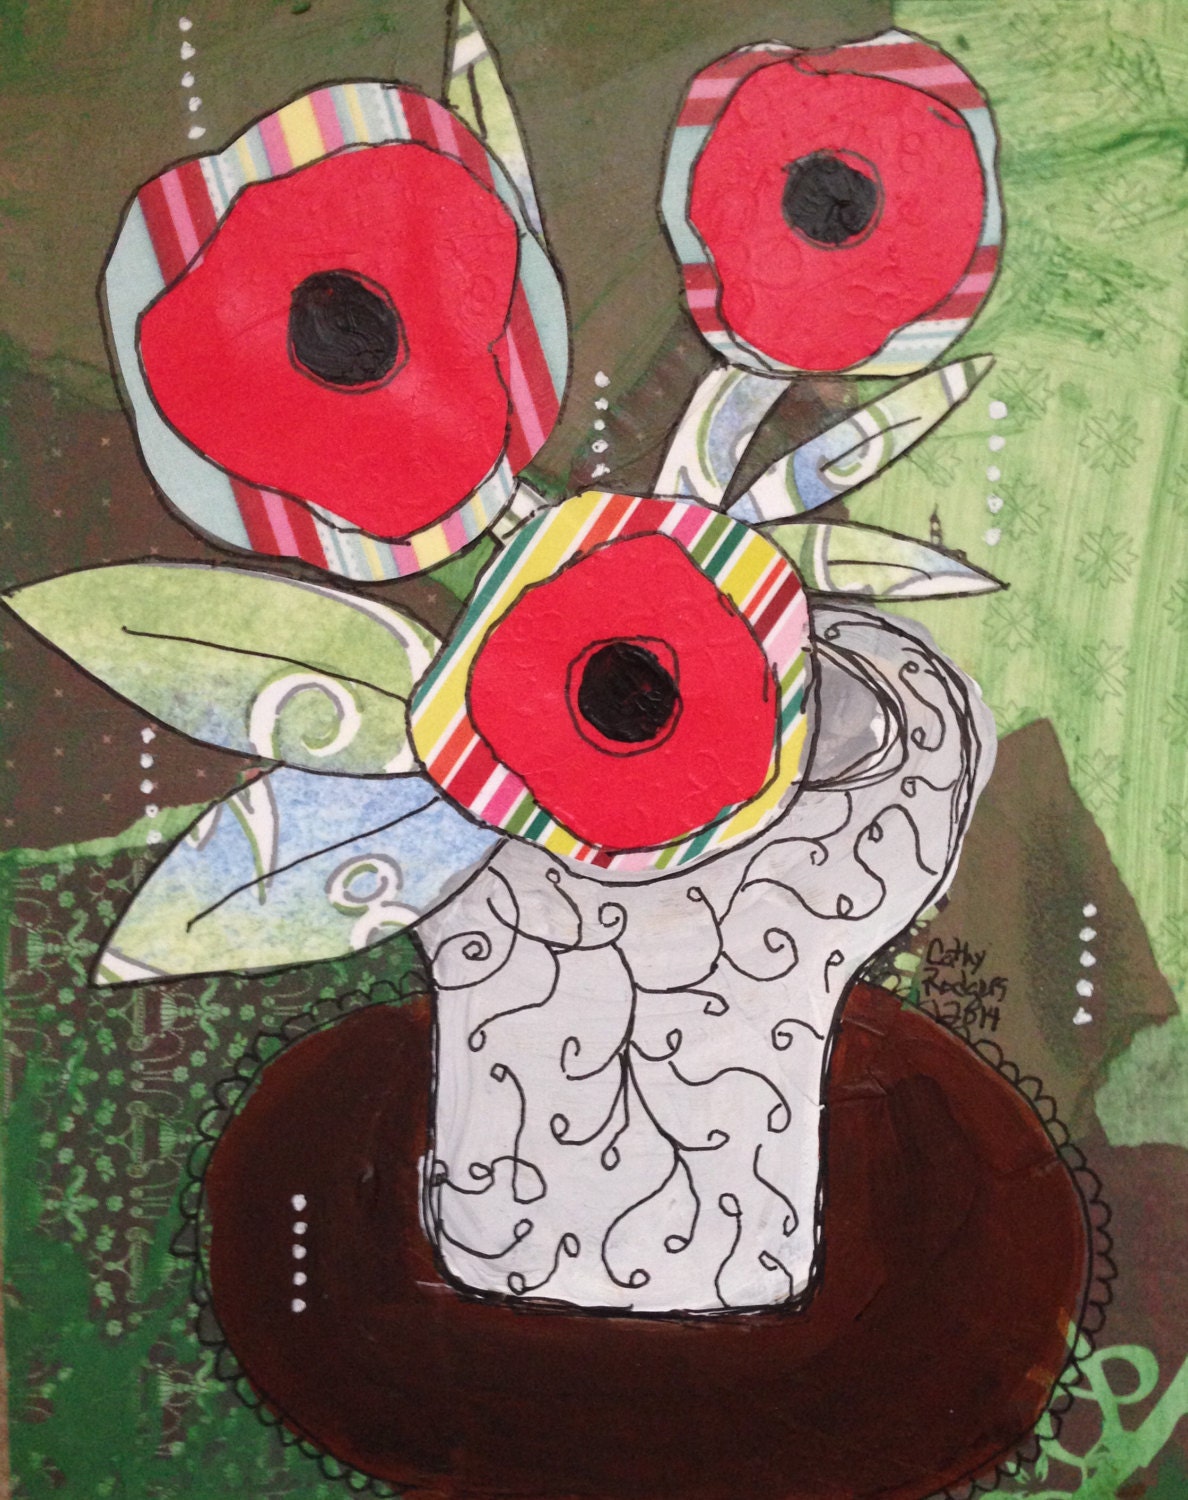 Red Poppies Mixed Media Art By Cathyrodgersfineart On Etsy